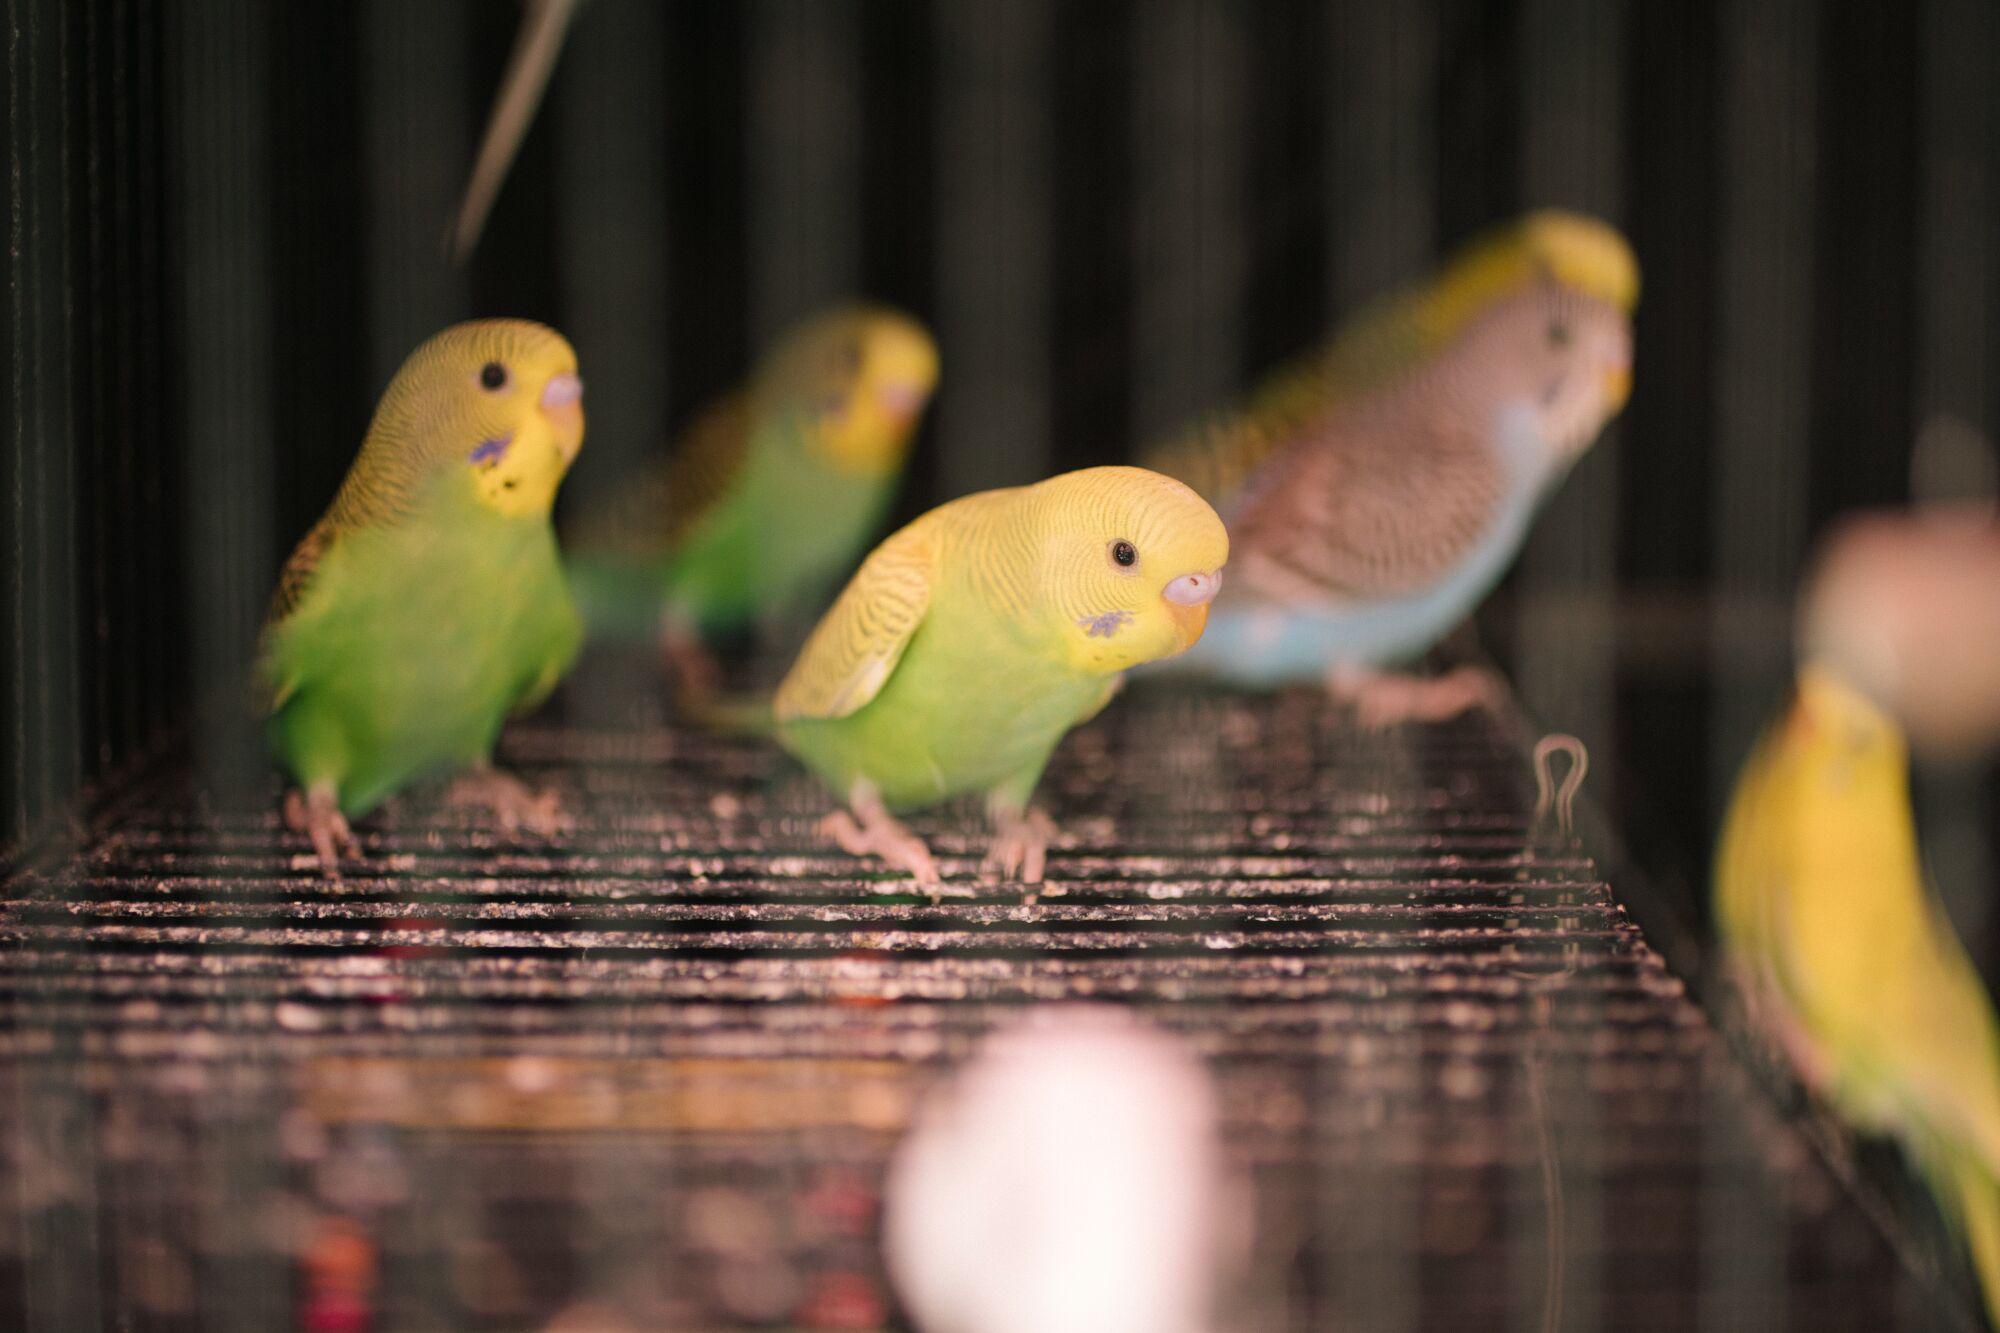 A handful of parakeets standing together inside a cage.